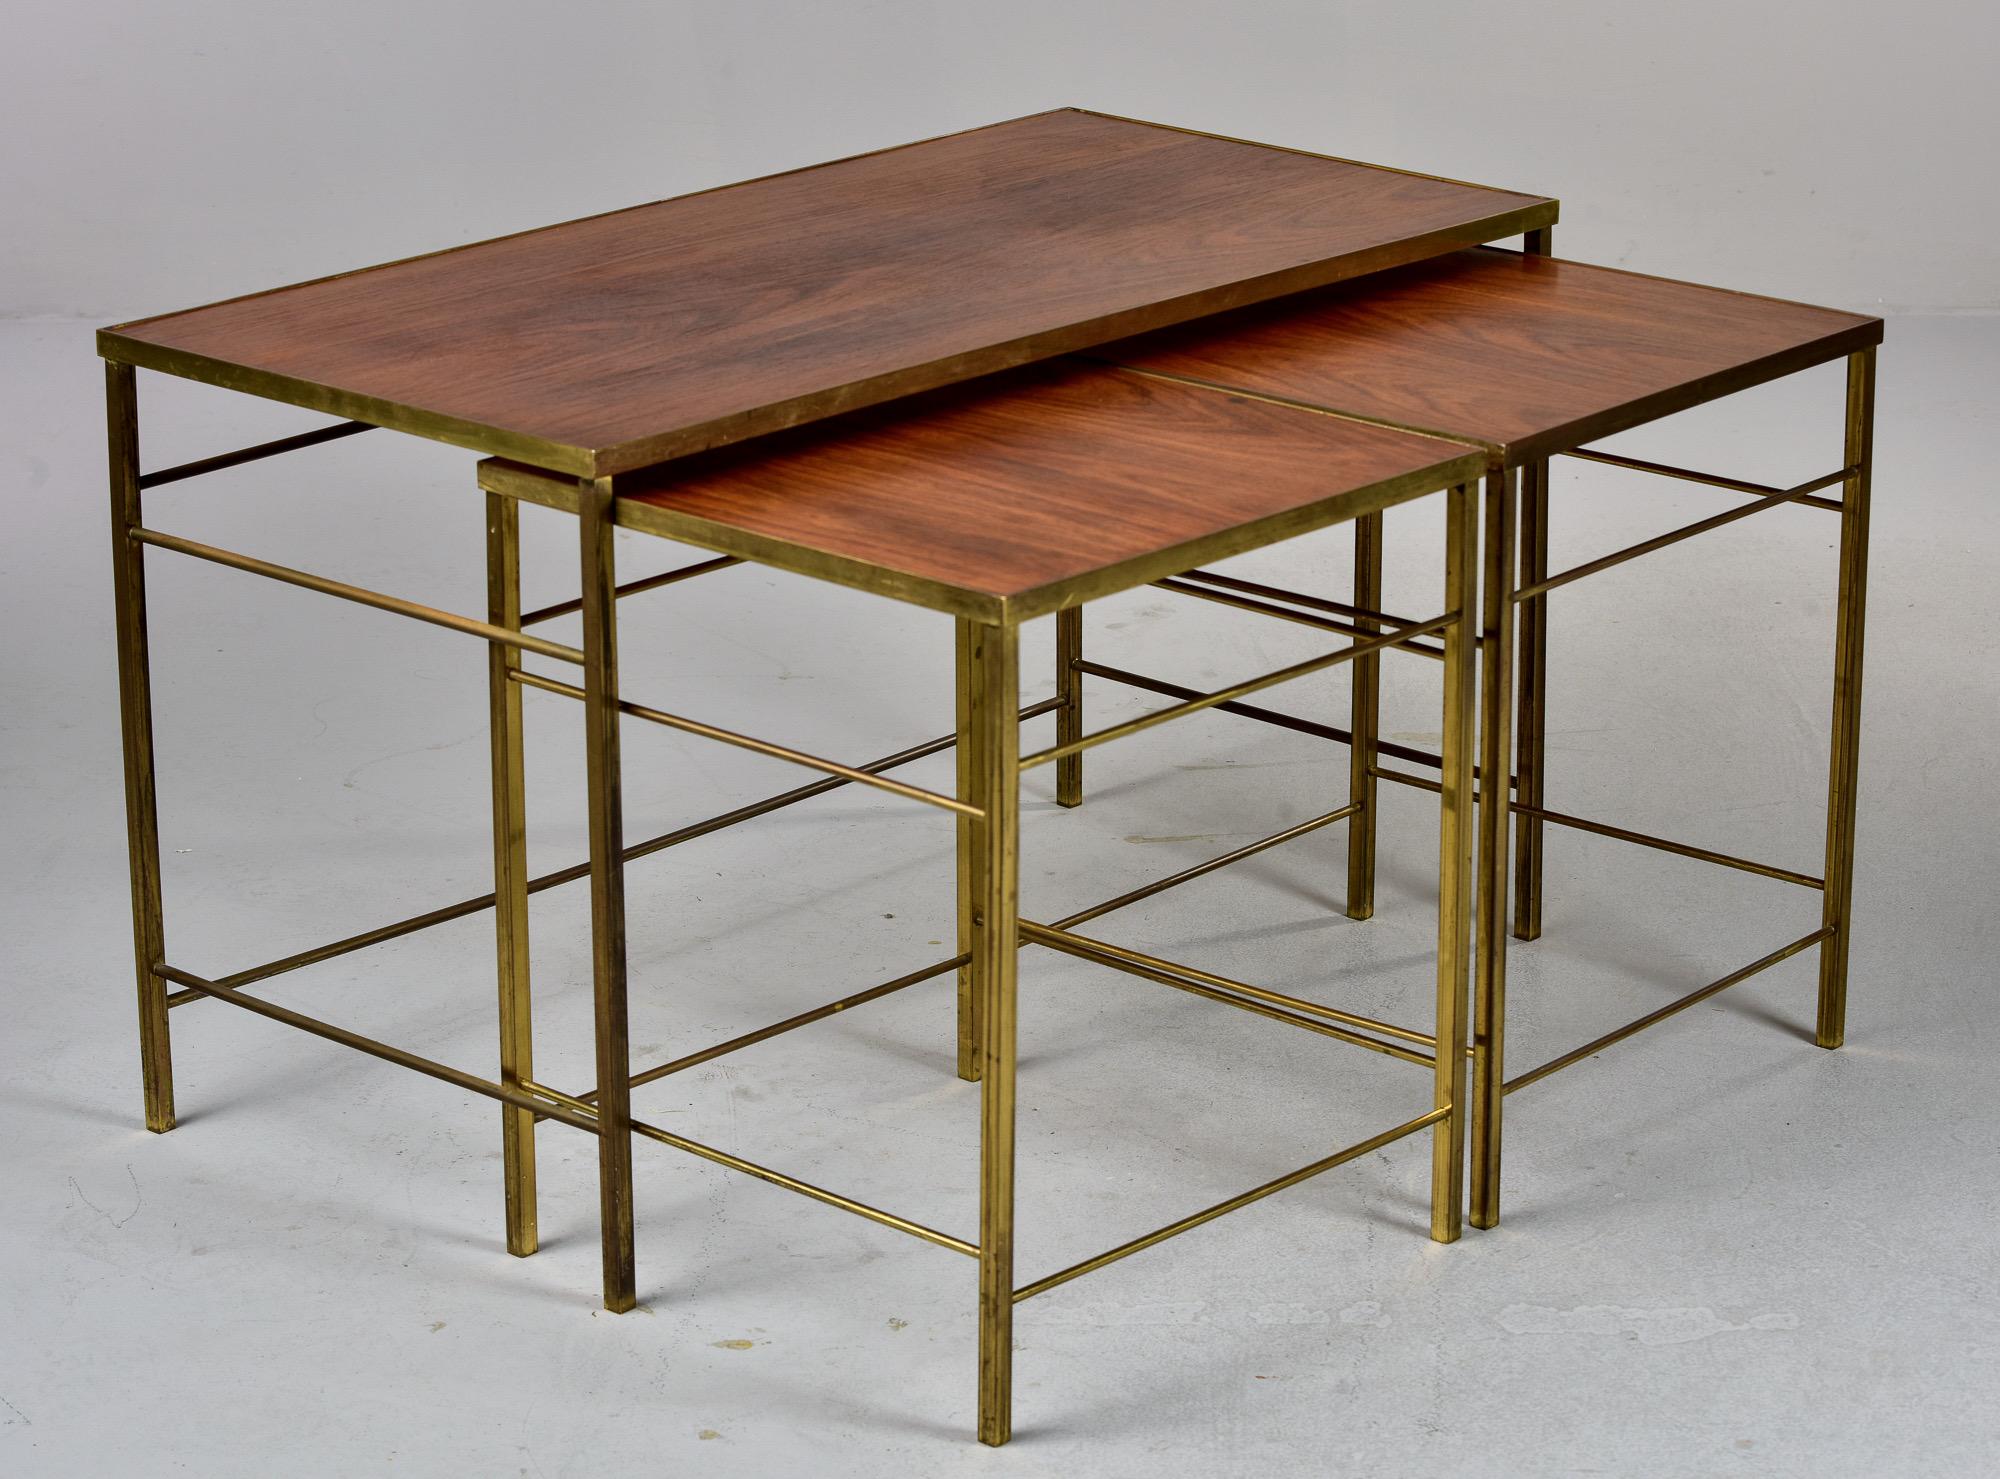 English Mid Century Brass and Wood Trio of Stacking Tables In Good Condition For Sale In Troy, MI